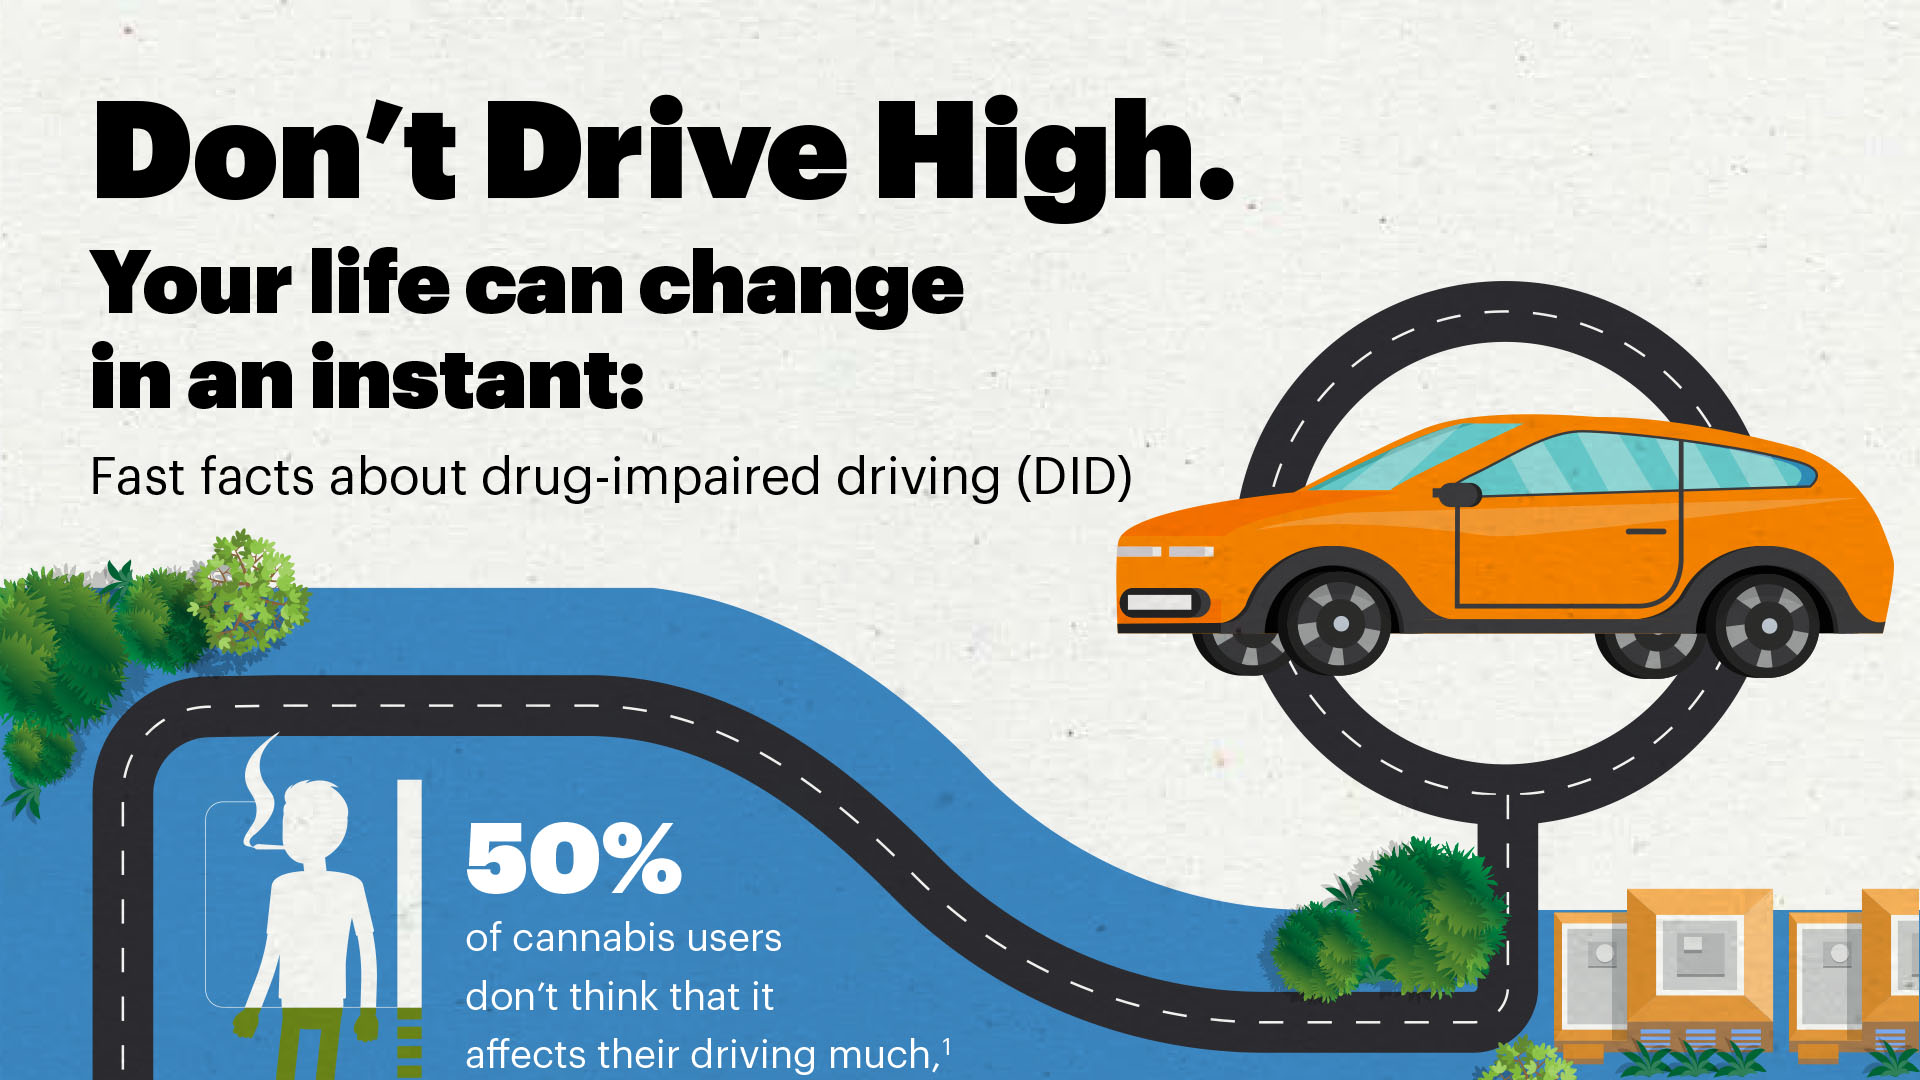 Fast facts about drug-impaired driving (DID)